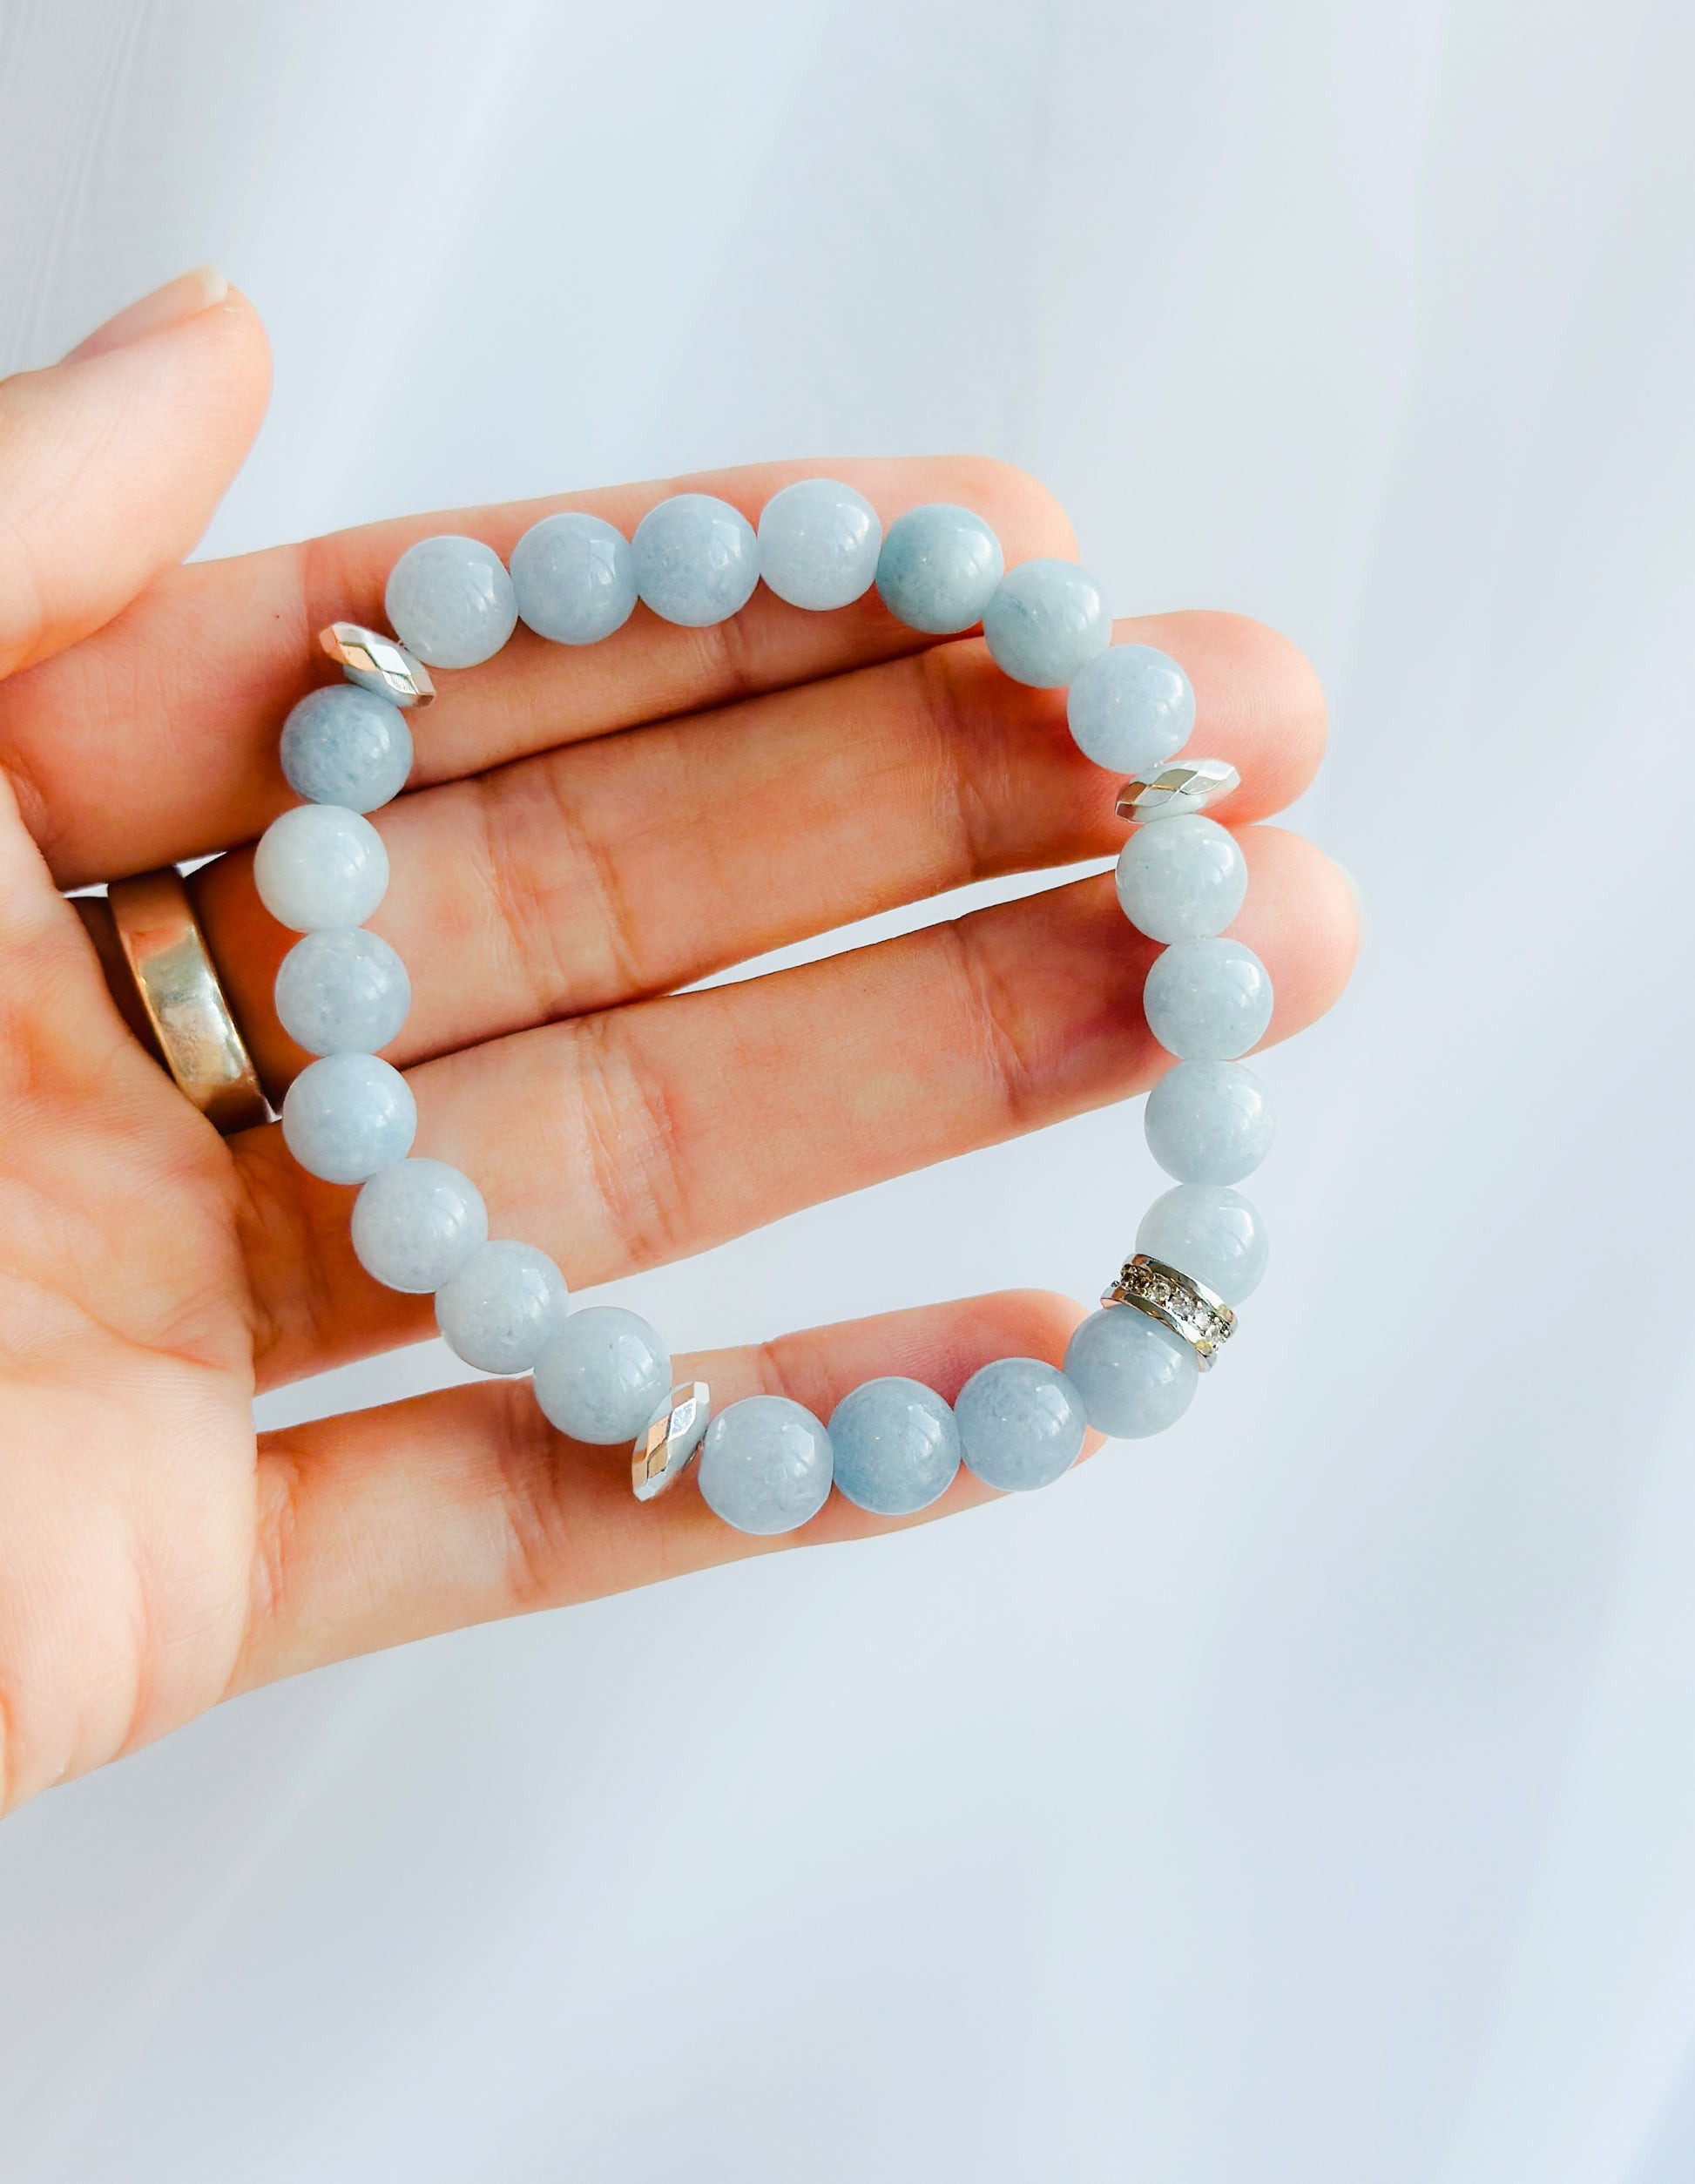 The Aqua Elegance Bracelet is more than just a beautiful accessory; it's a stunning embodiment of the serene and healing energies of aquamarine gemstones. Known for its captivating blue hues reminiscent of tranquil ocean waters, Aquamarine is celebrated for its various metaphysical properties.